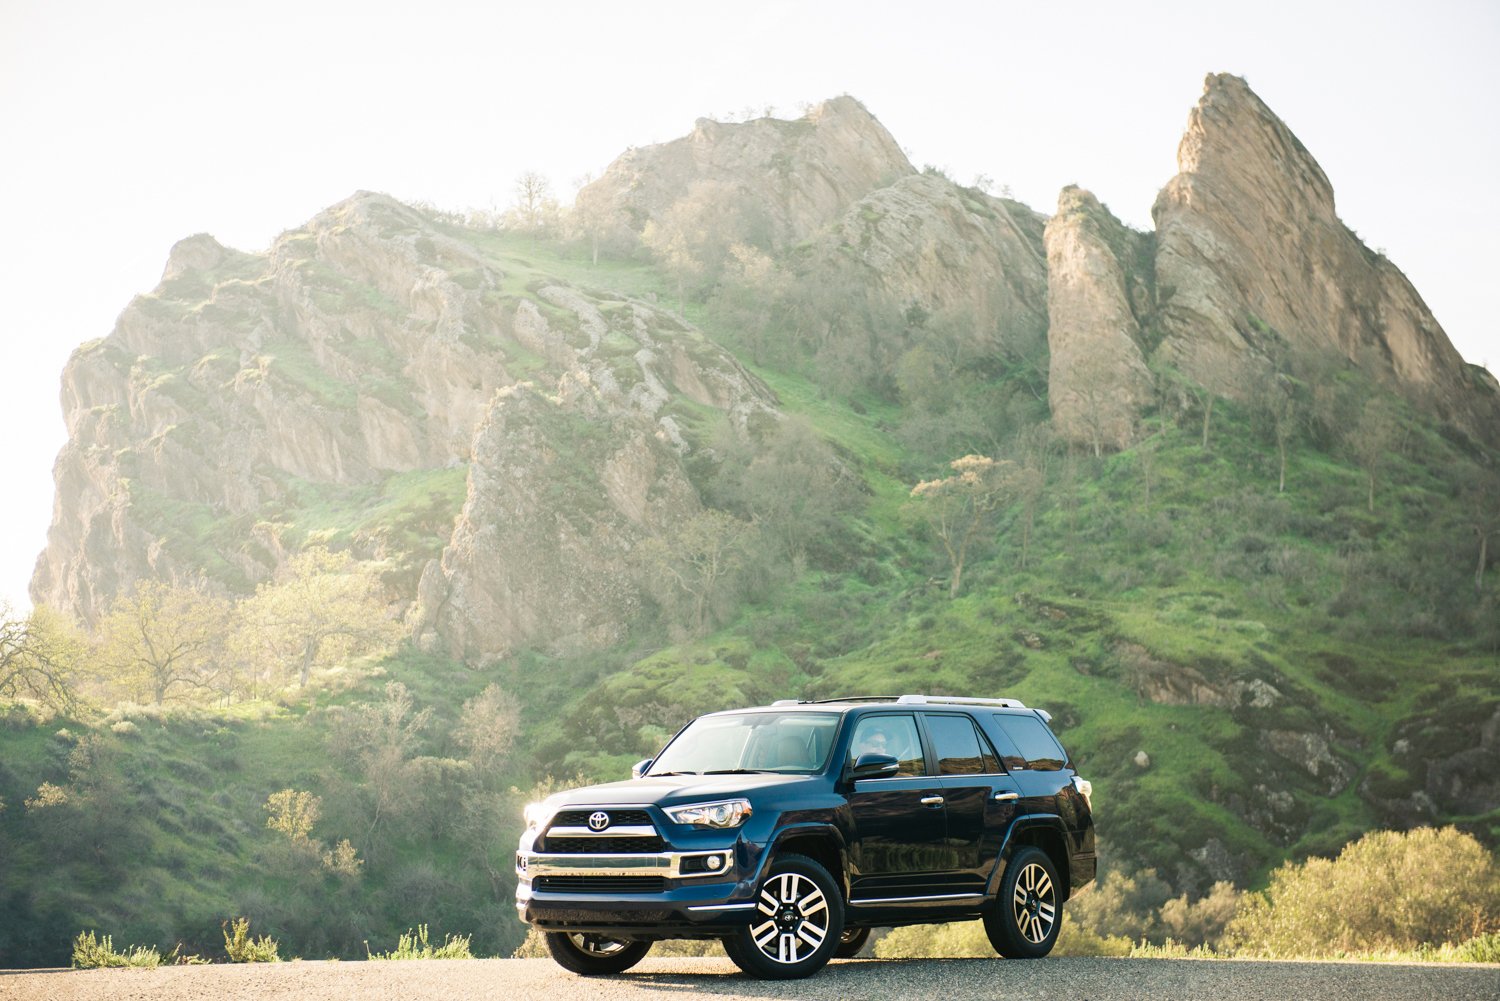 Toyota 4Runner parked in front of a beautiful, grassy rock structure, photo by Mark Skovorodko.